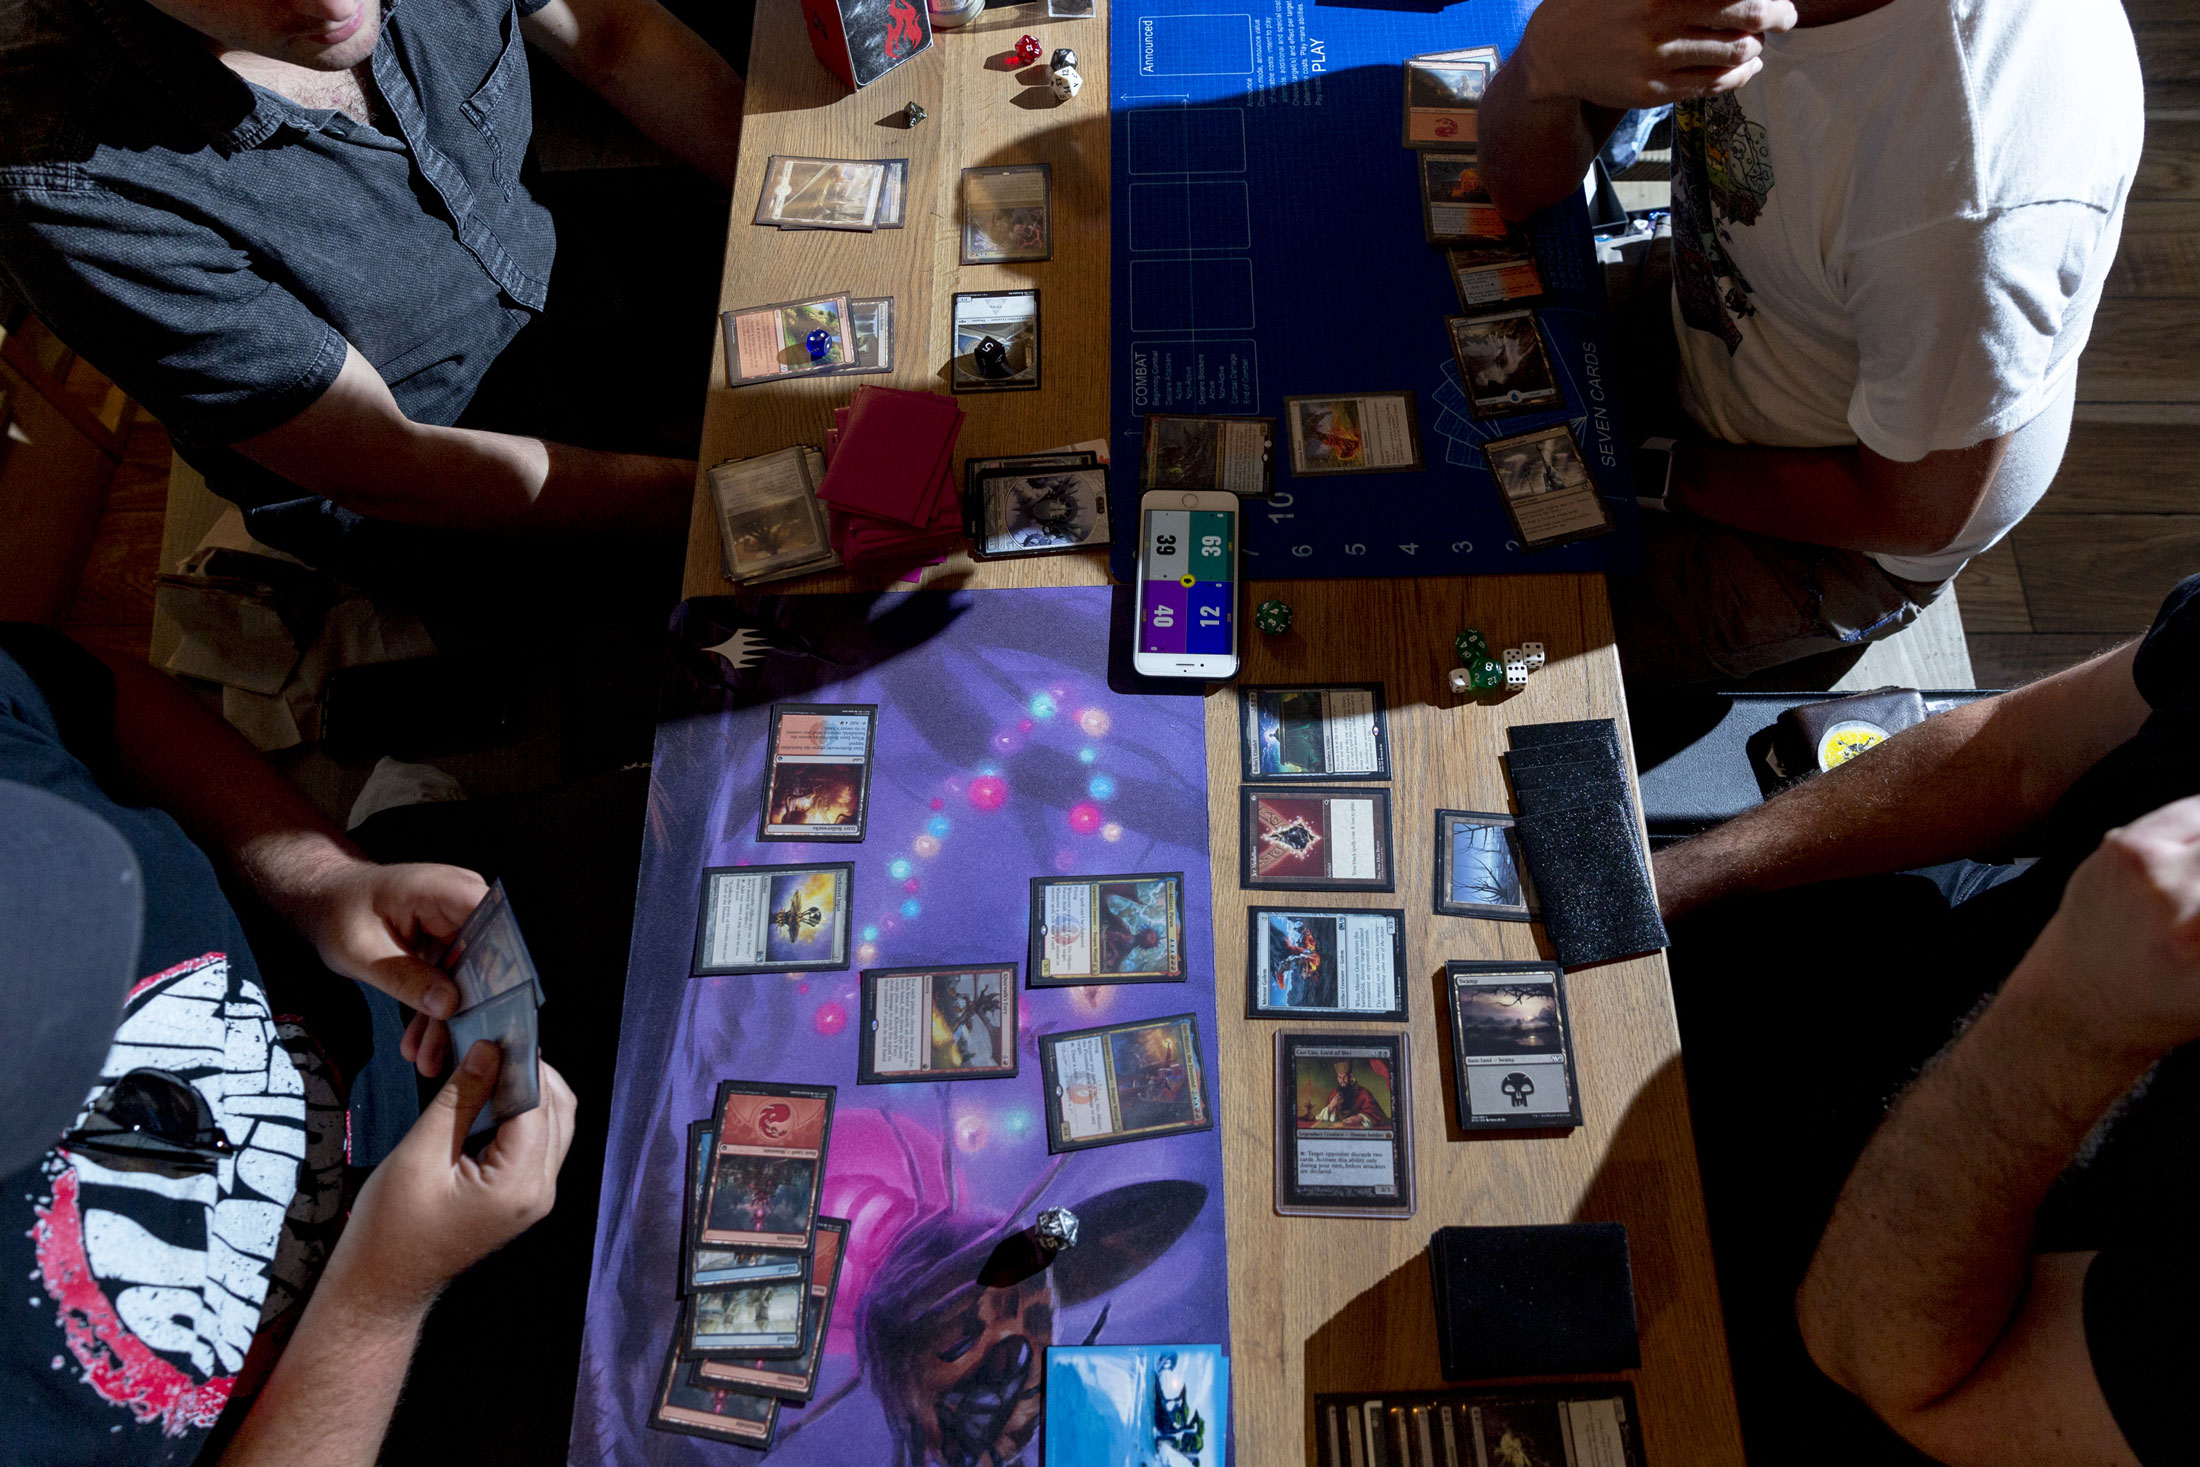 Magic: The Gathering Arena: From Tabletop to Online Gaming